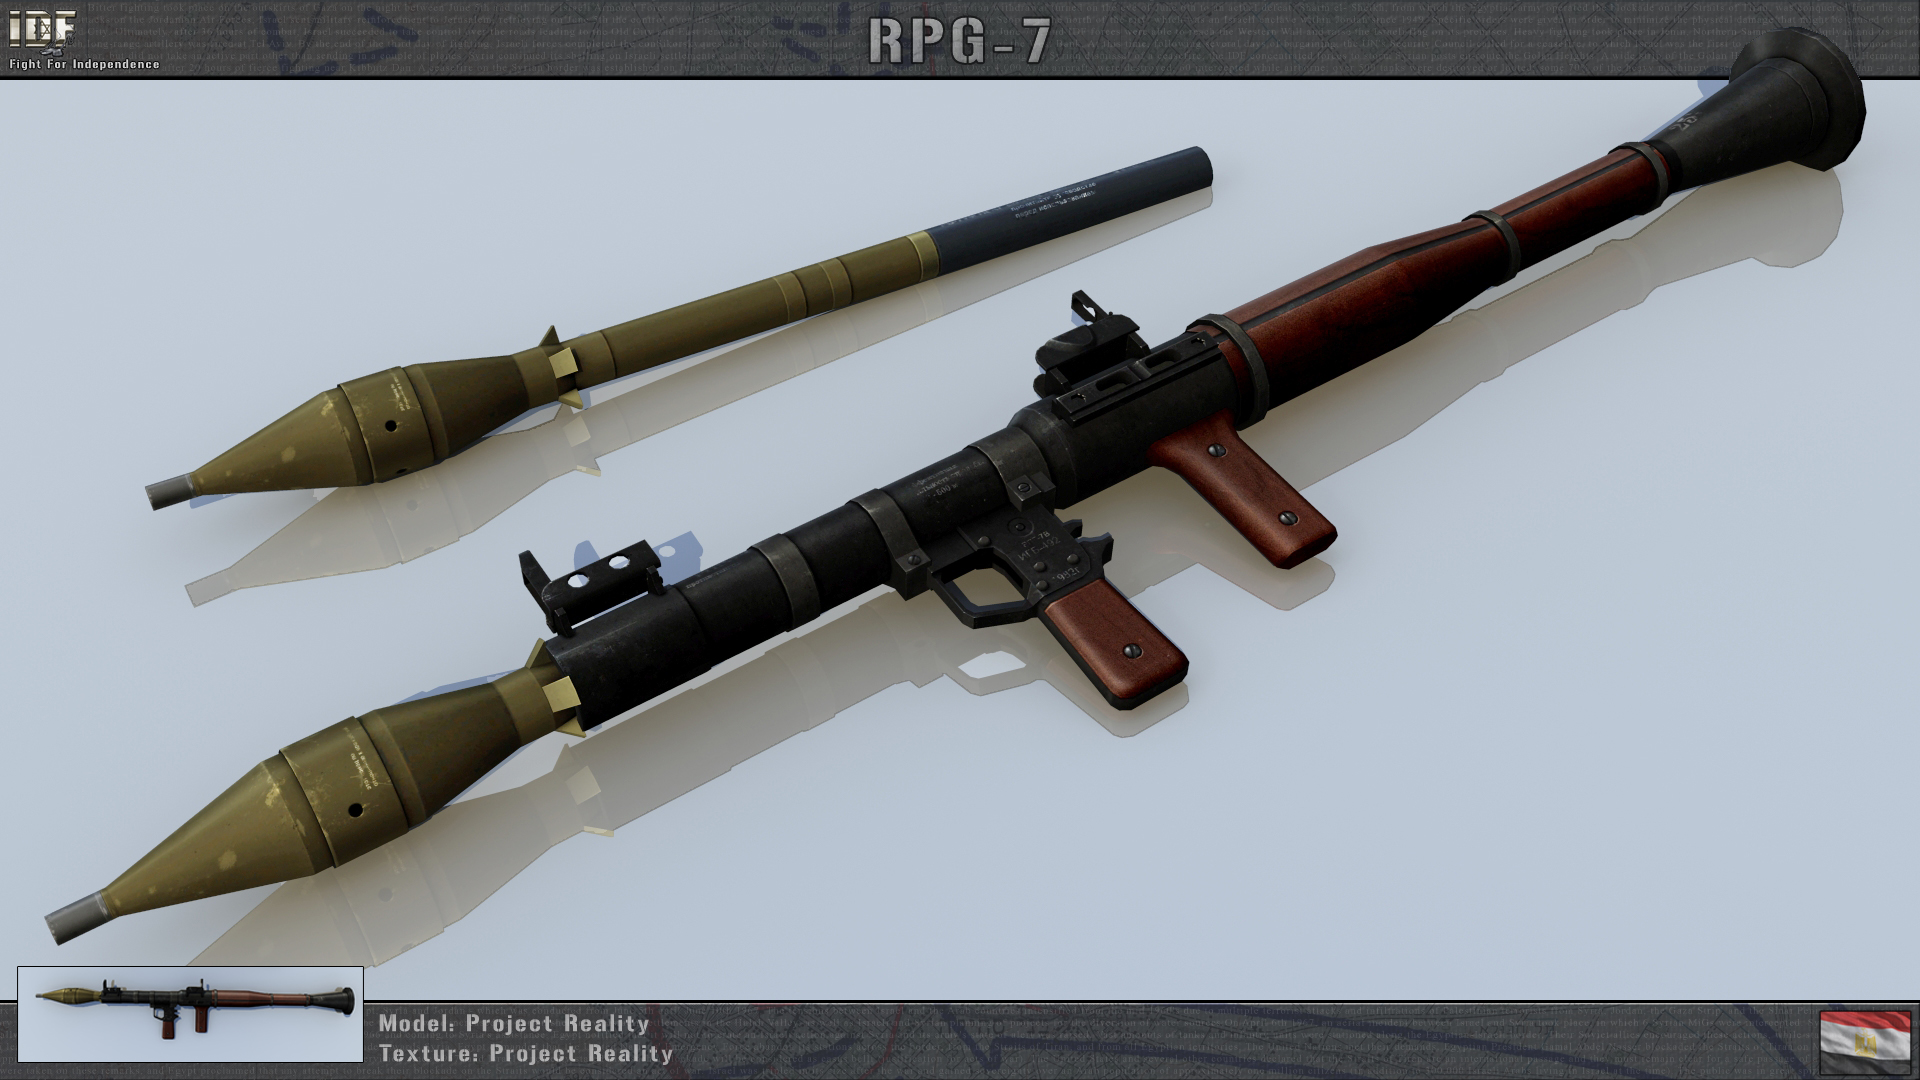 Rpg 7 Simple But Effective Image Idf Fight For Independence Mod For Battlefield 2 Mod Db